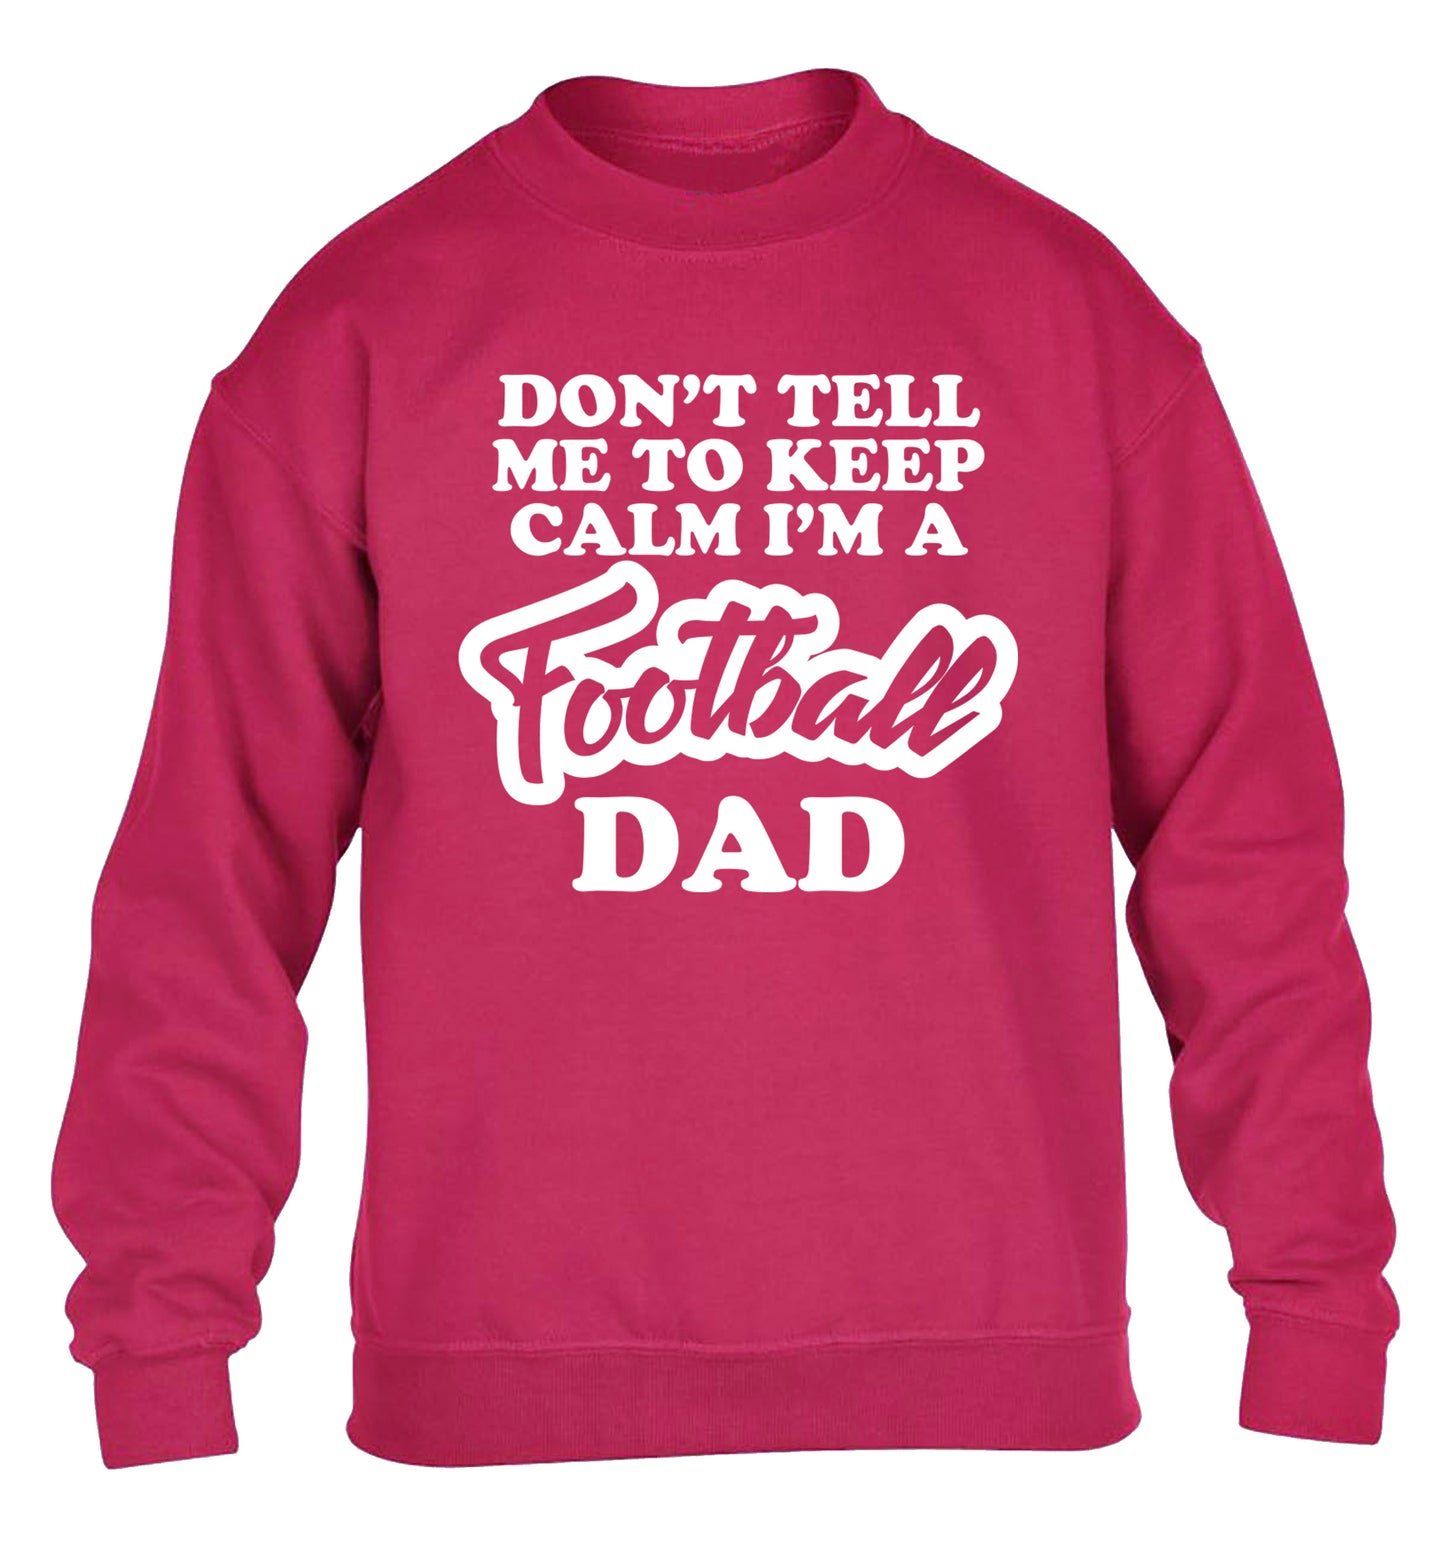 Don't tell me to keep calm I'm a football grandad children's pink sweater 12-14 Years